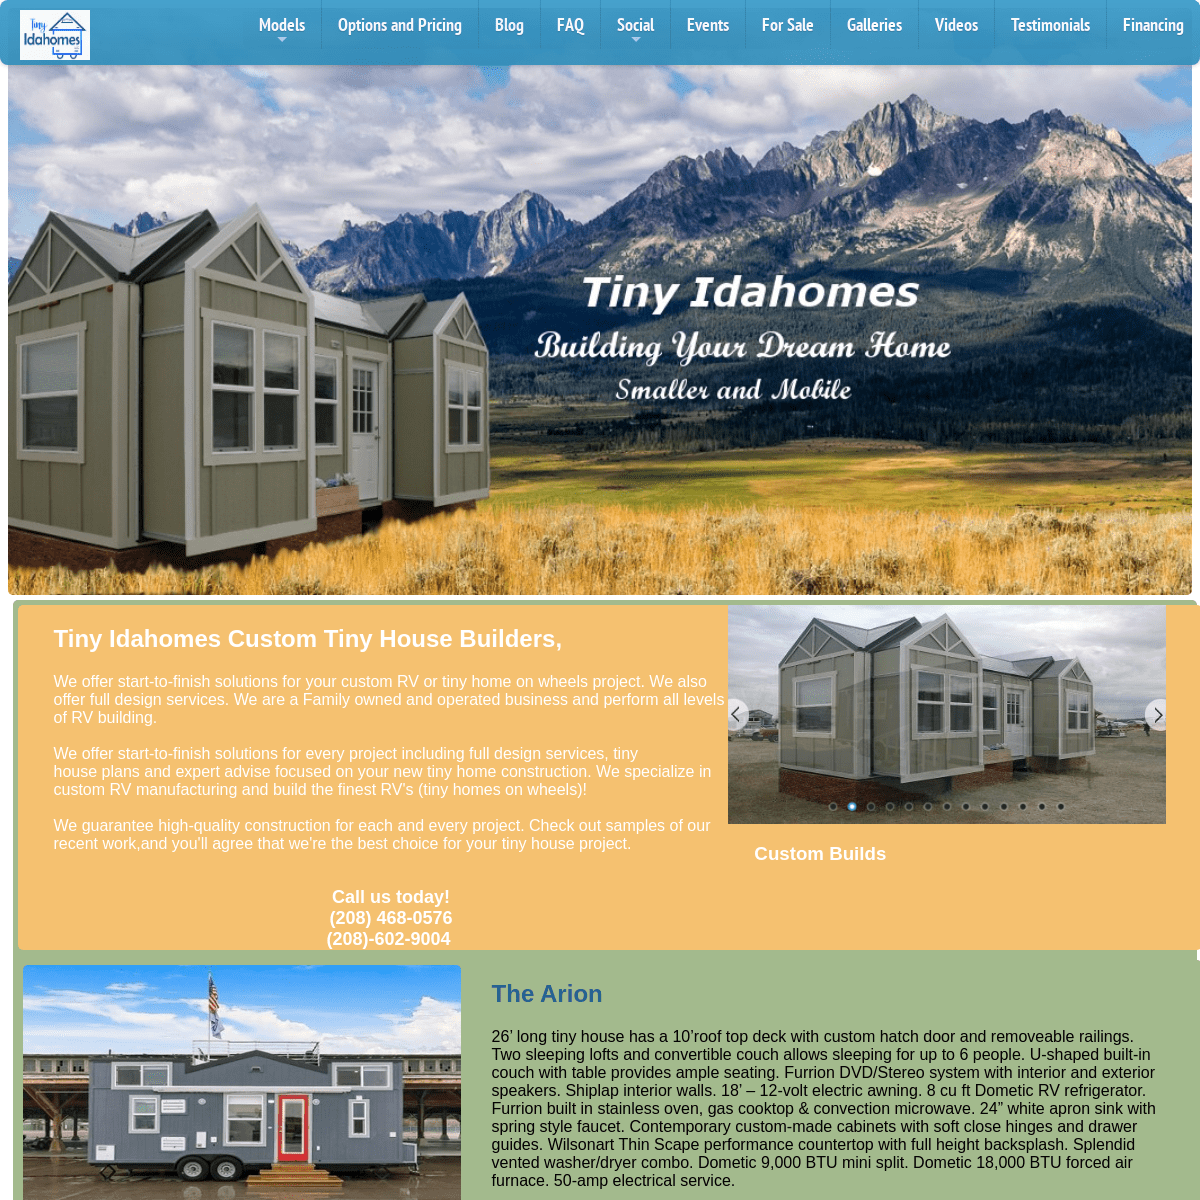 A complete backup of tinyidahomes.com